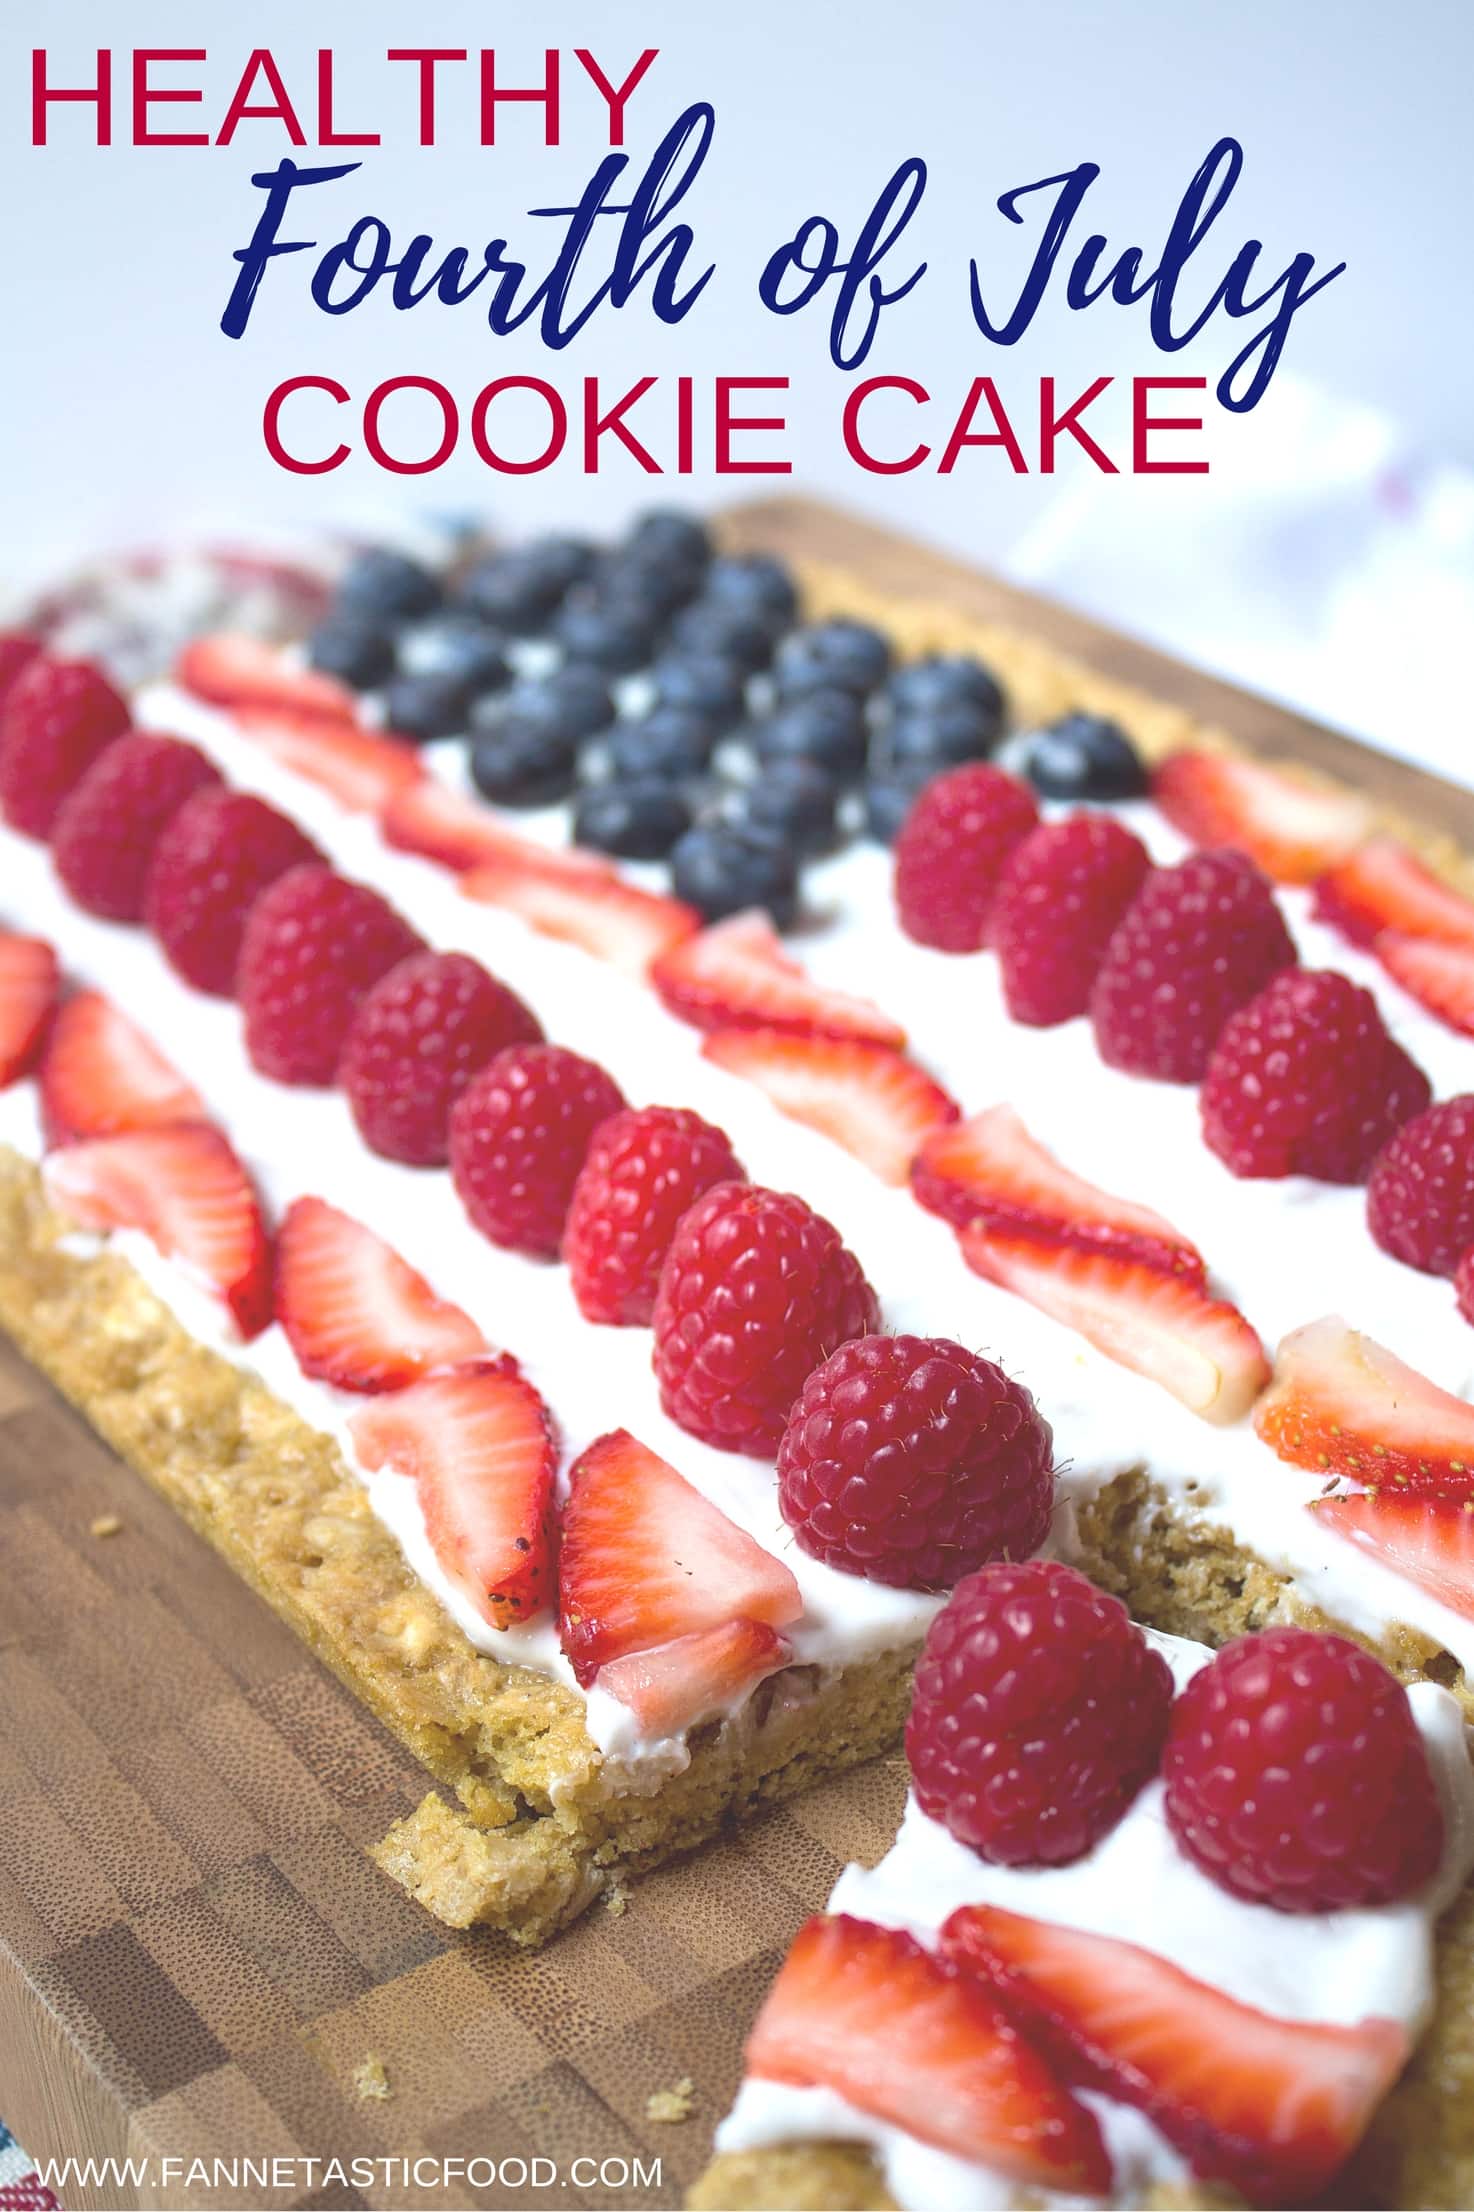 Create a Festive Spread of 4th of July Snacks